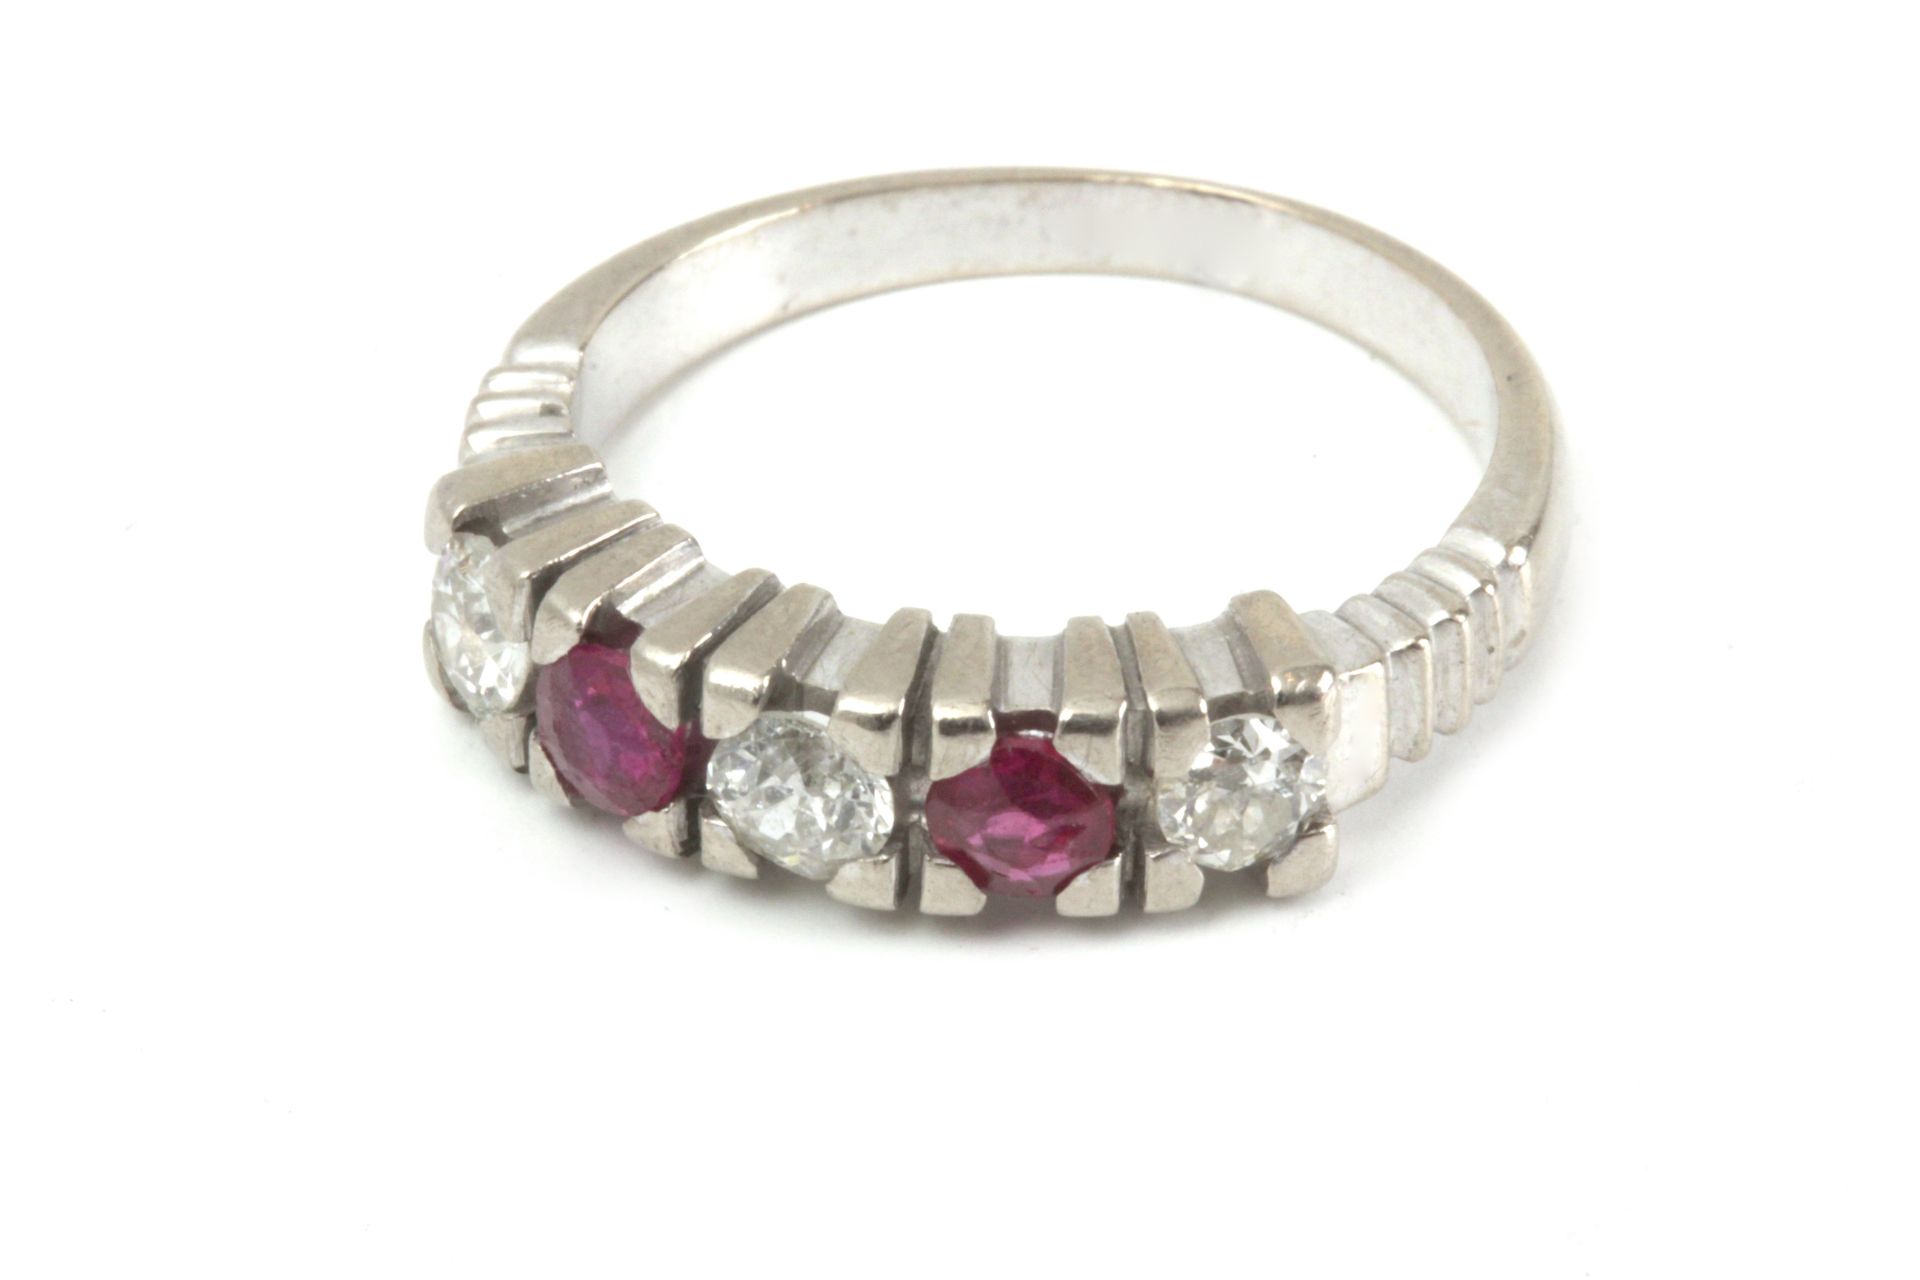 A five stone diamond and ruby ring with an 18k. gold setting